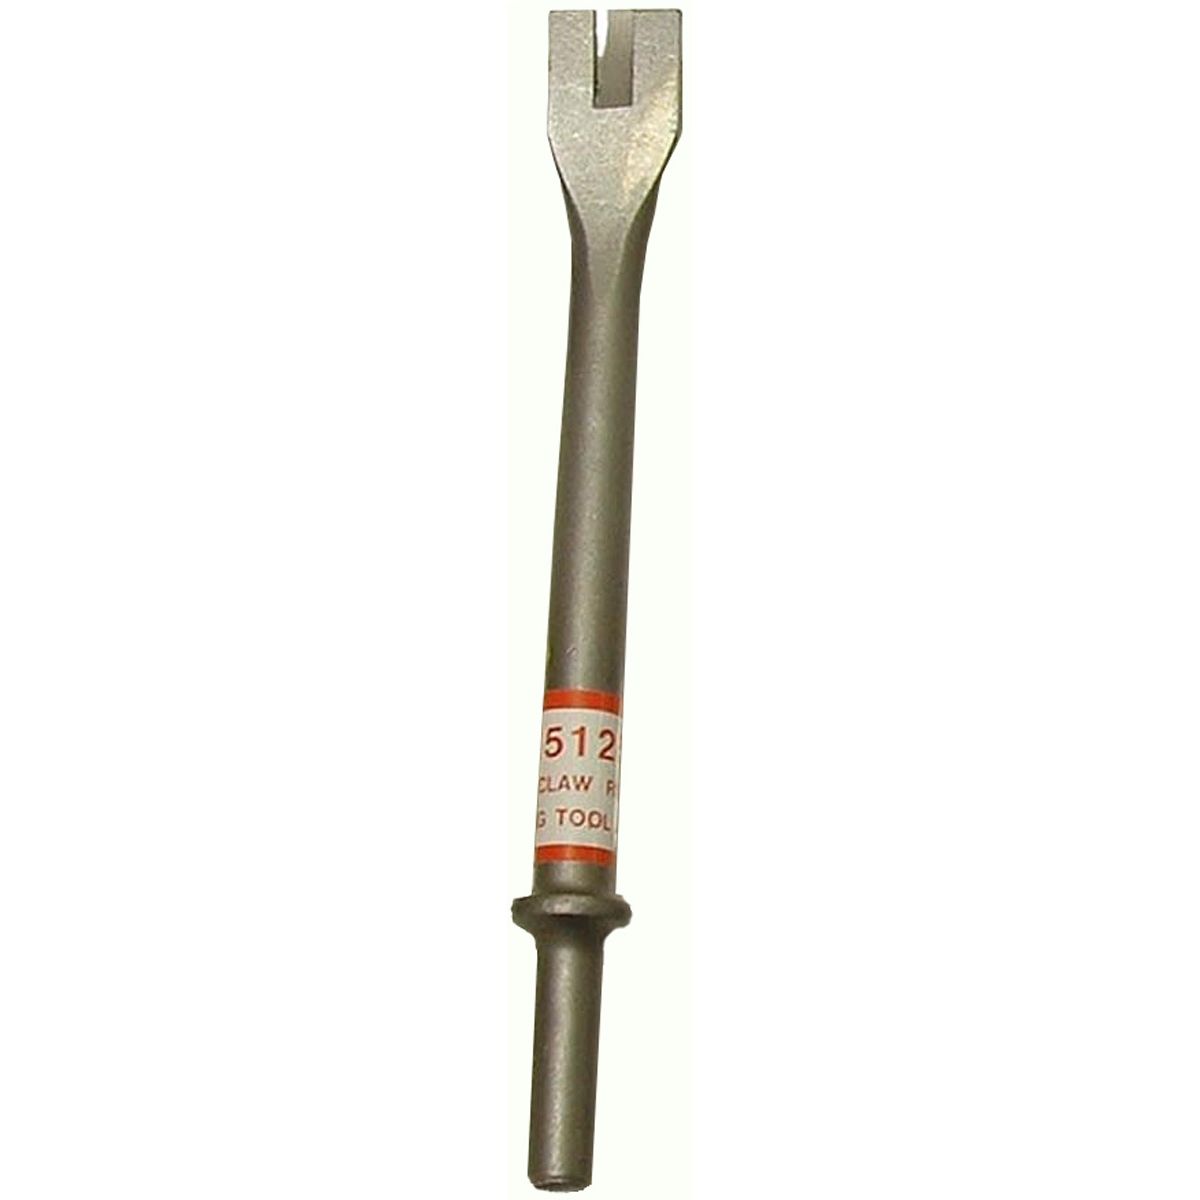 Claw Ripper/Panel Edger Chisel